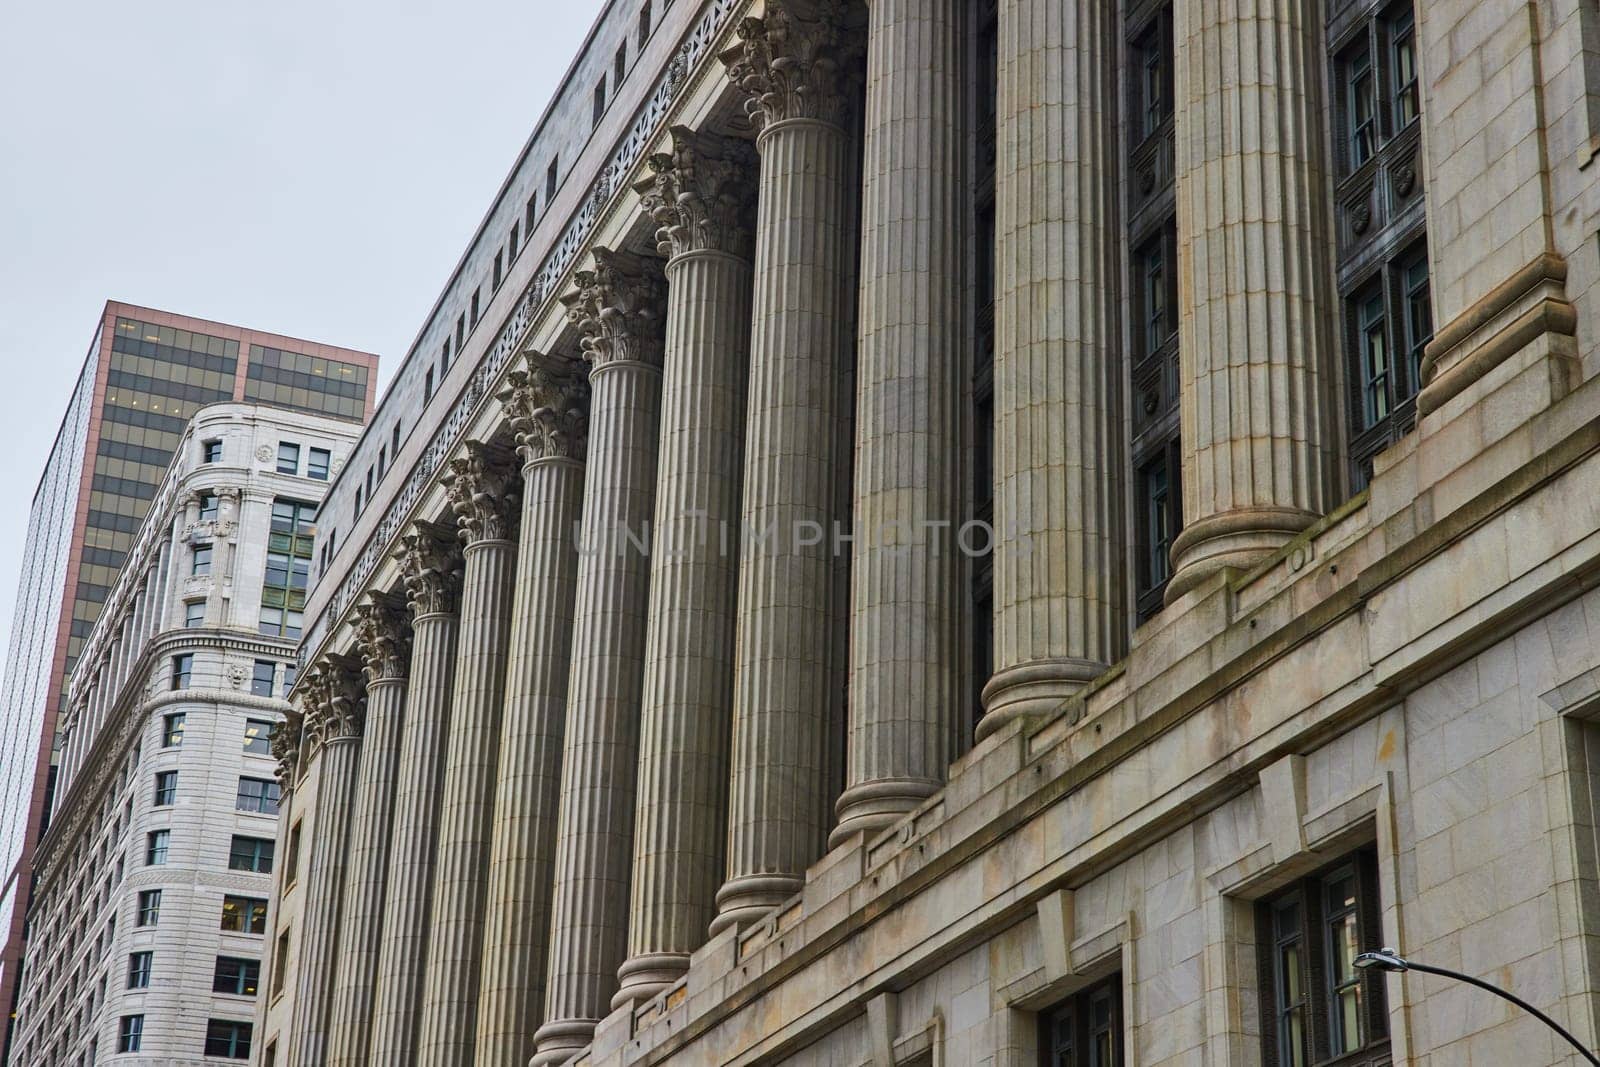 Image of Grey building with pillars and columns on overcast day with gloomy, ominous sky, Chicago, IL